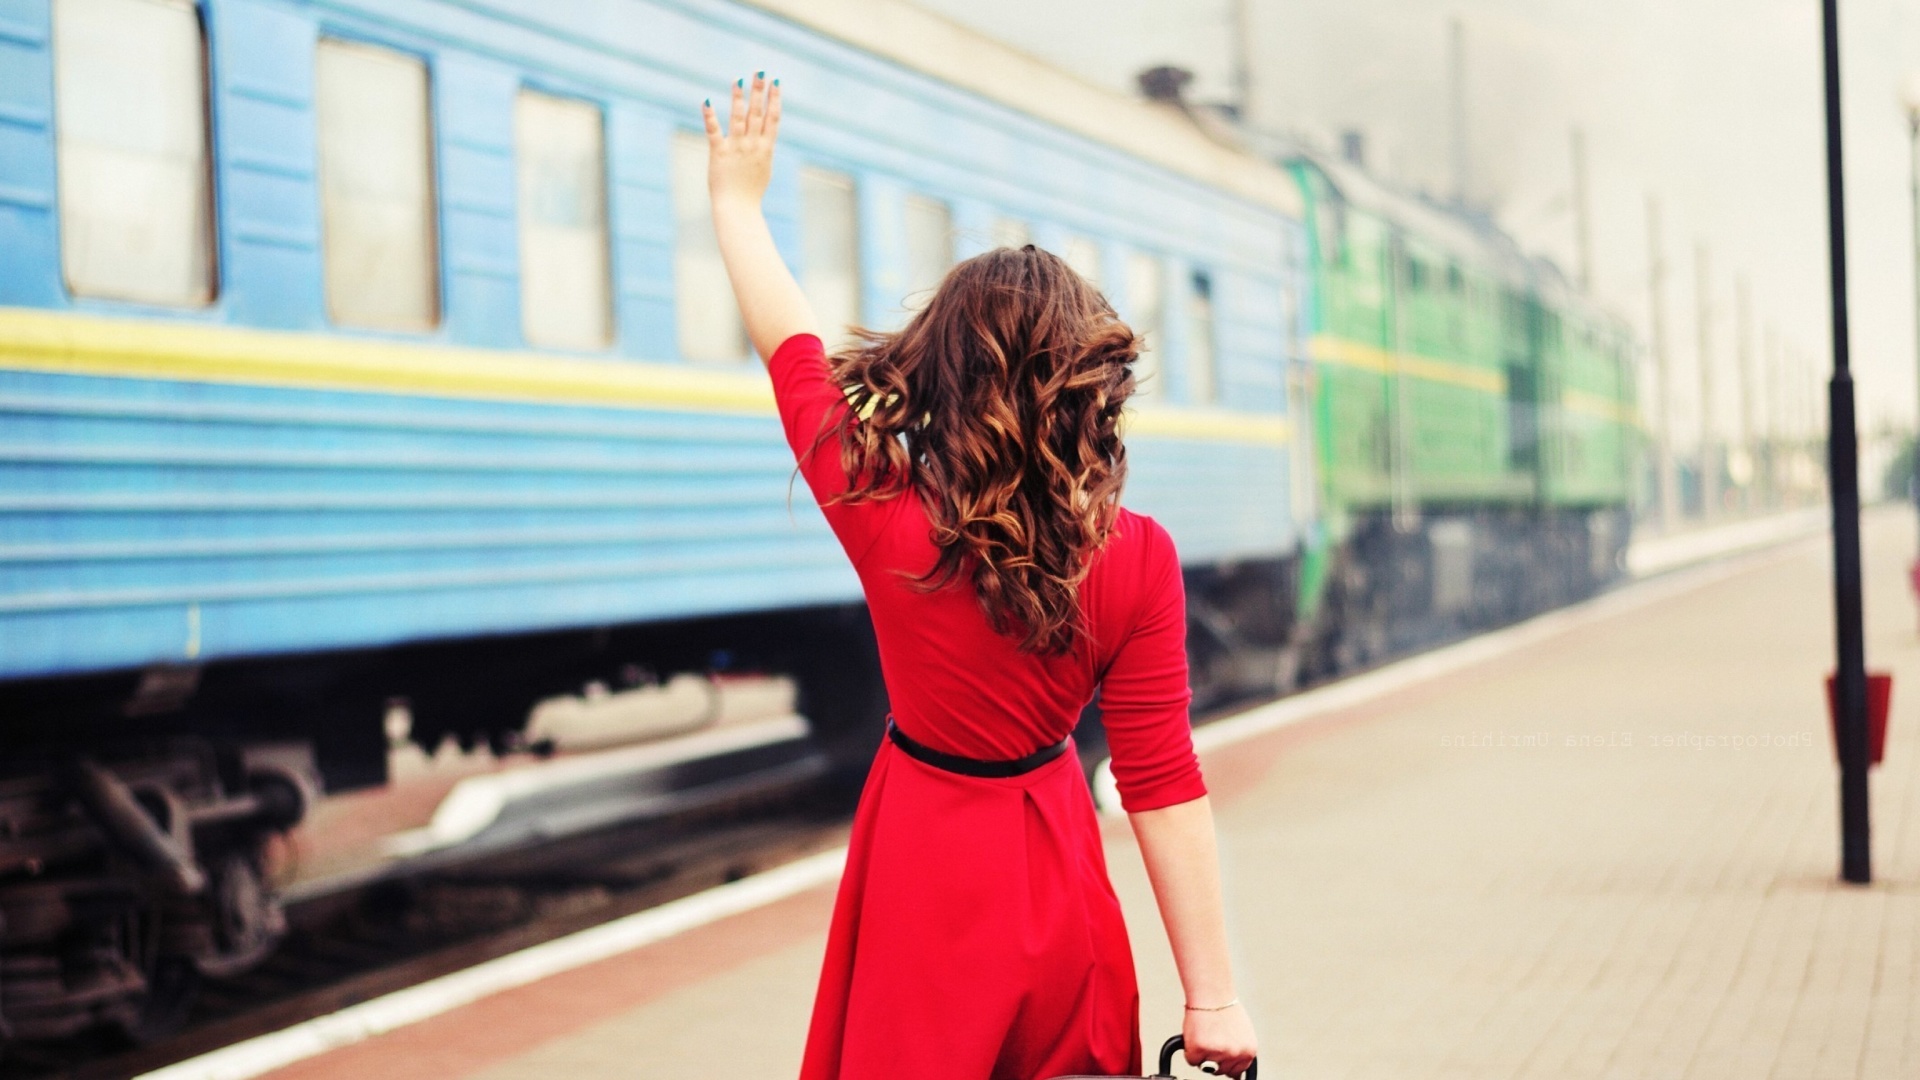 Girl traveling from train station wallpaper 1920x1080